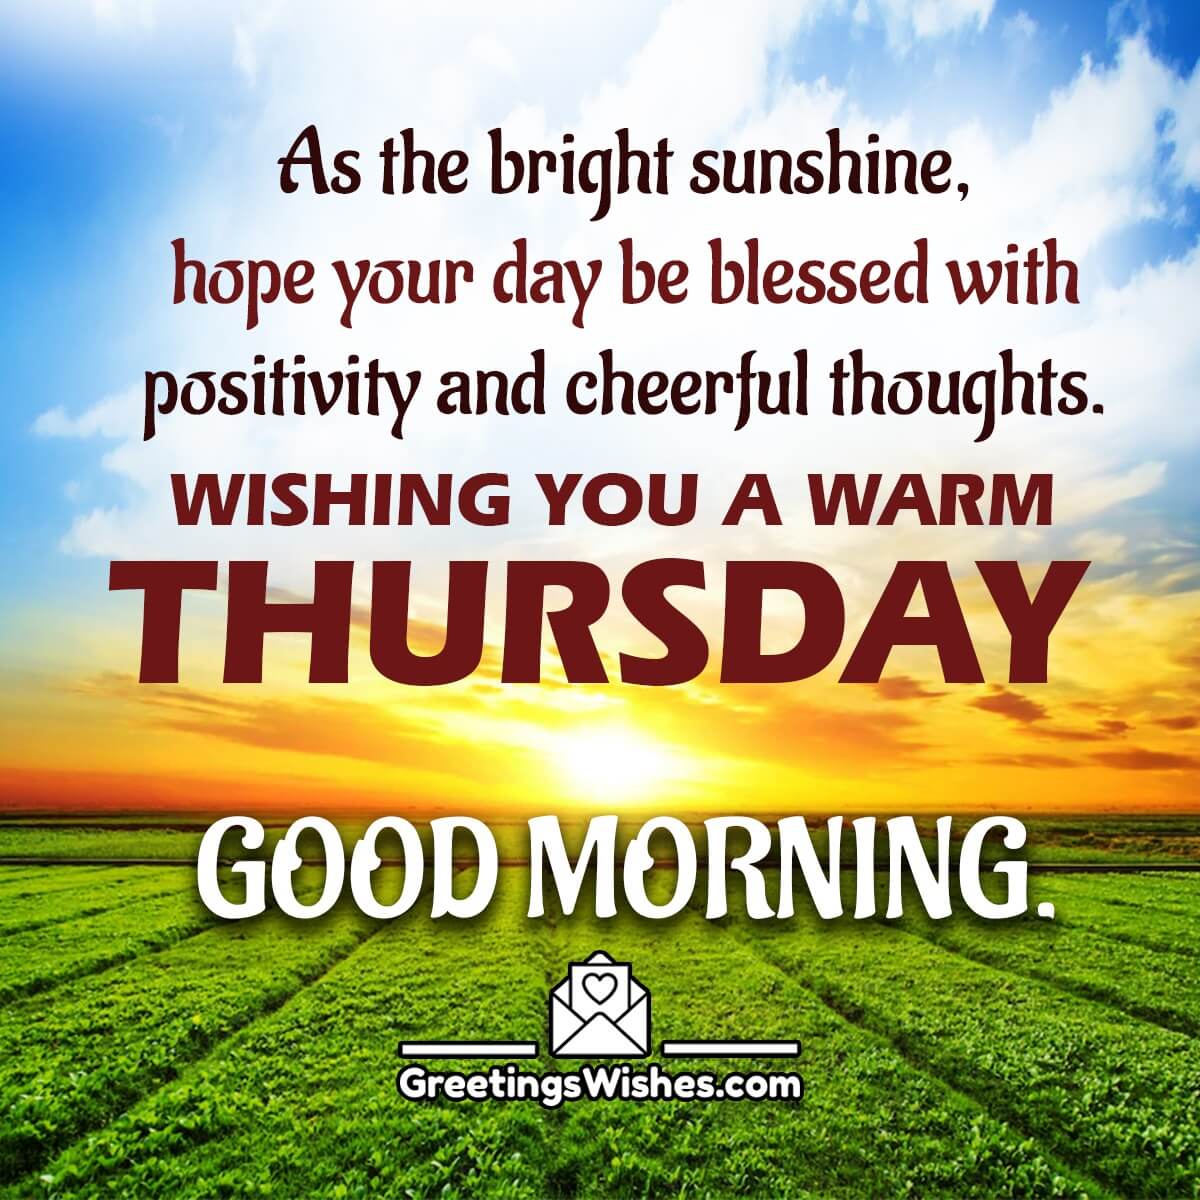 Thursday Morning Wishes - Greetings Wishes